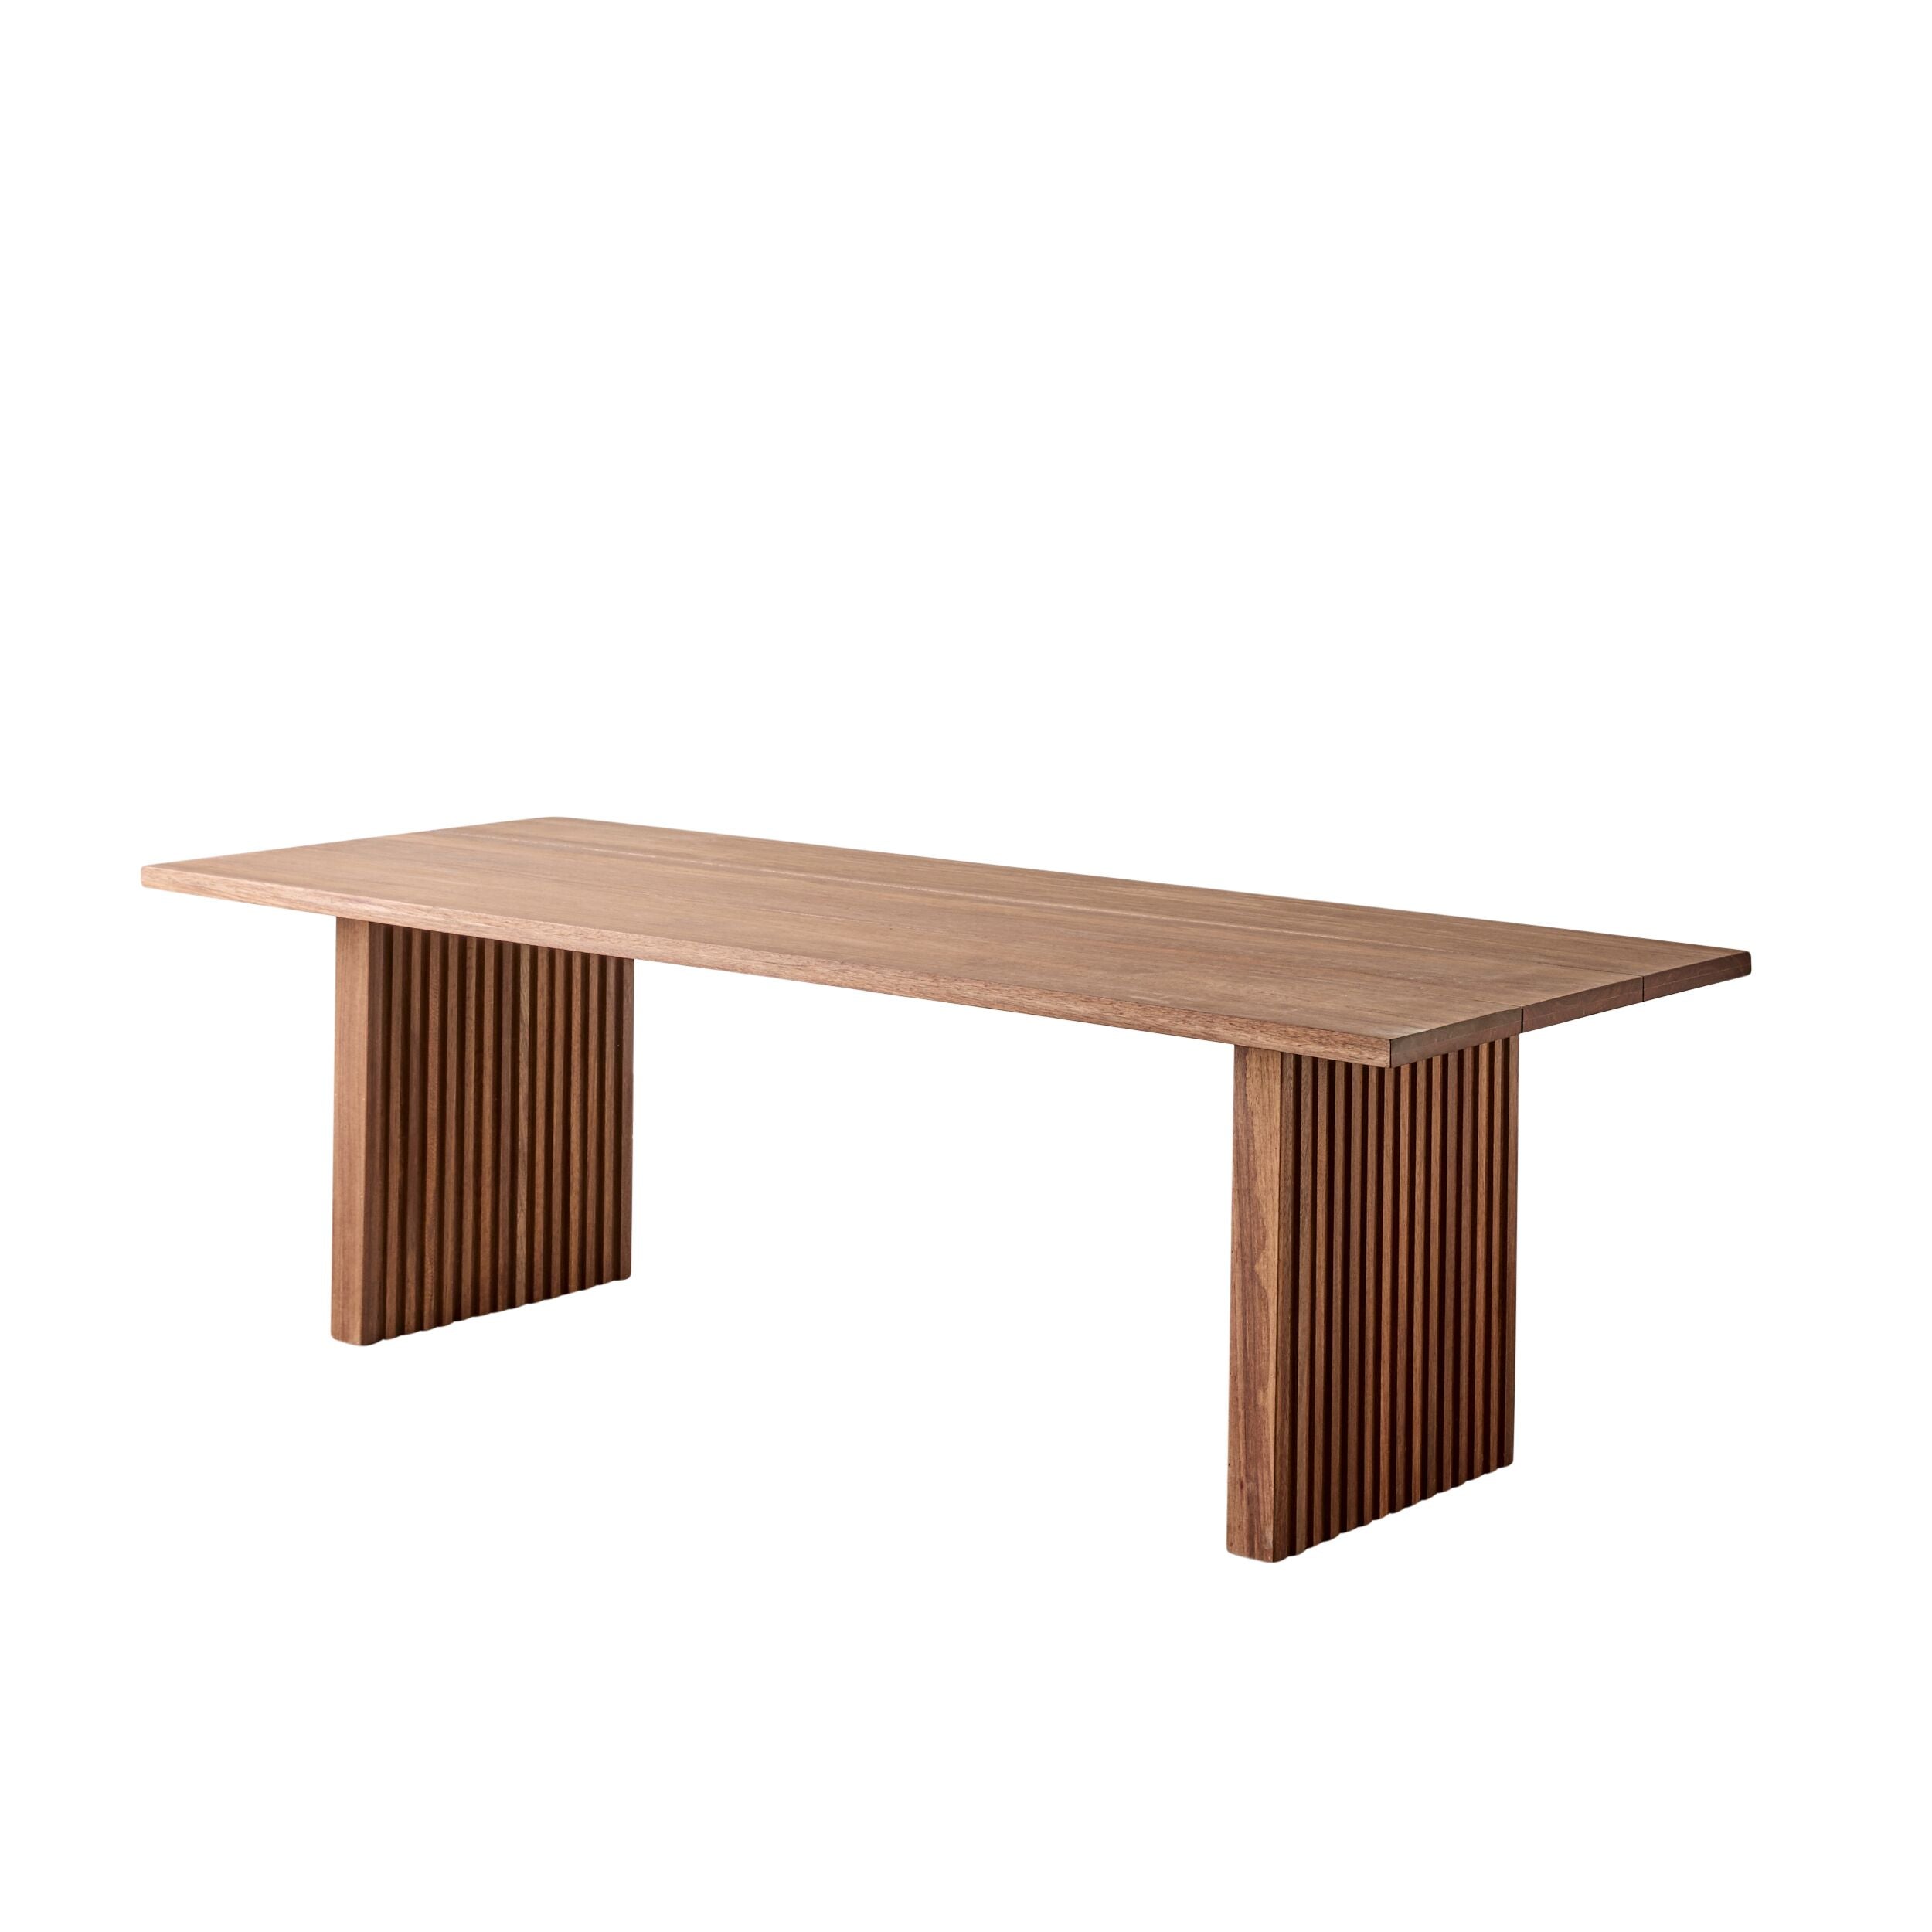 Oakey Outdoor Dining Table 240cm